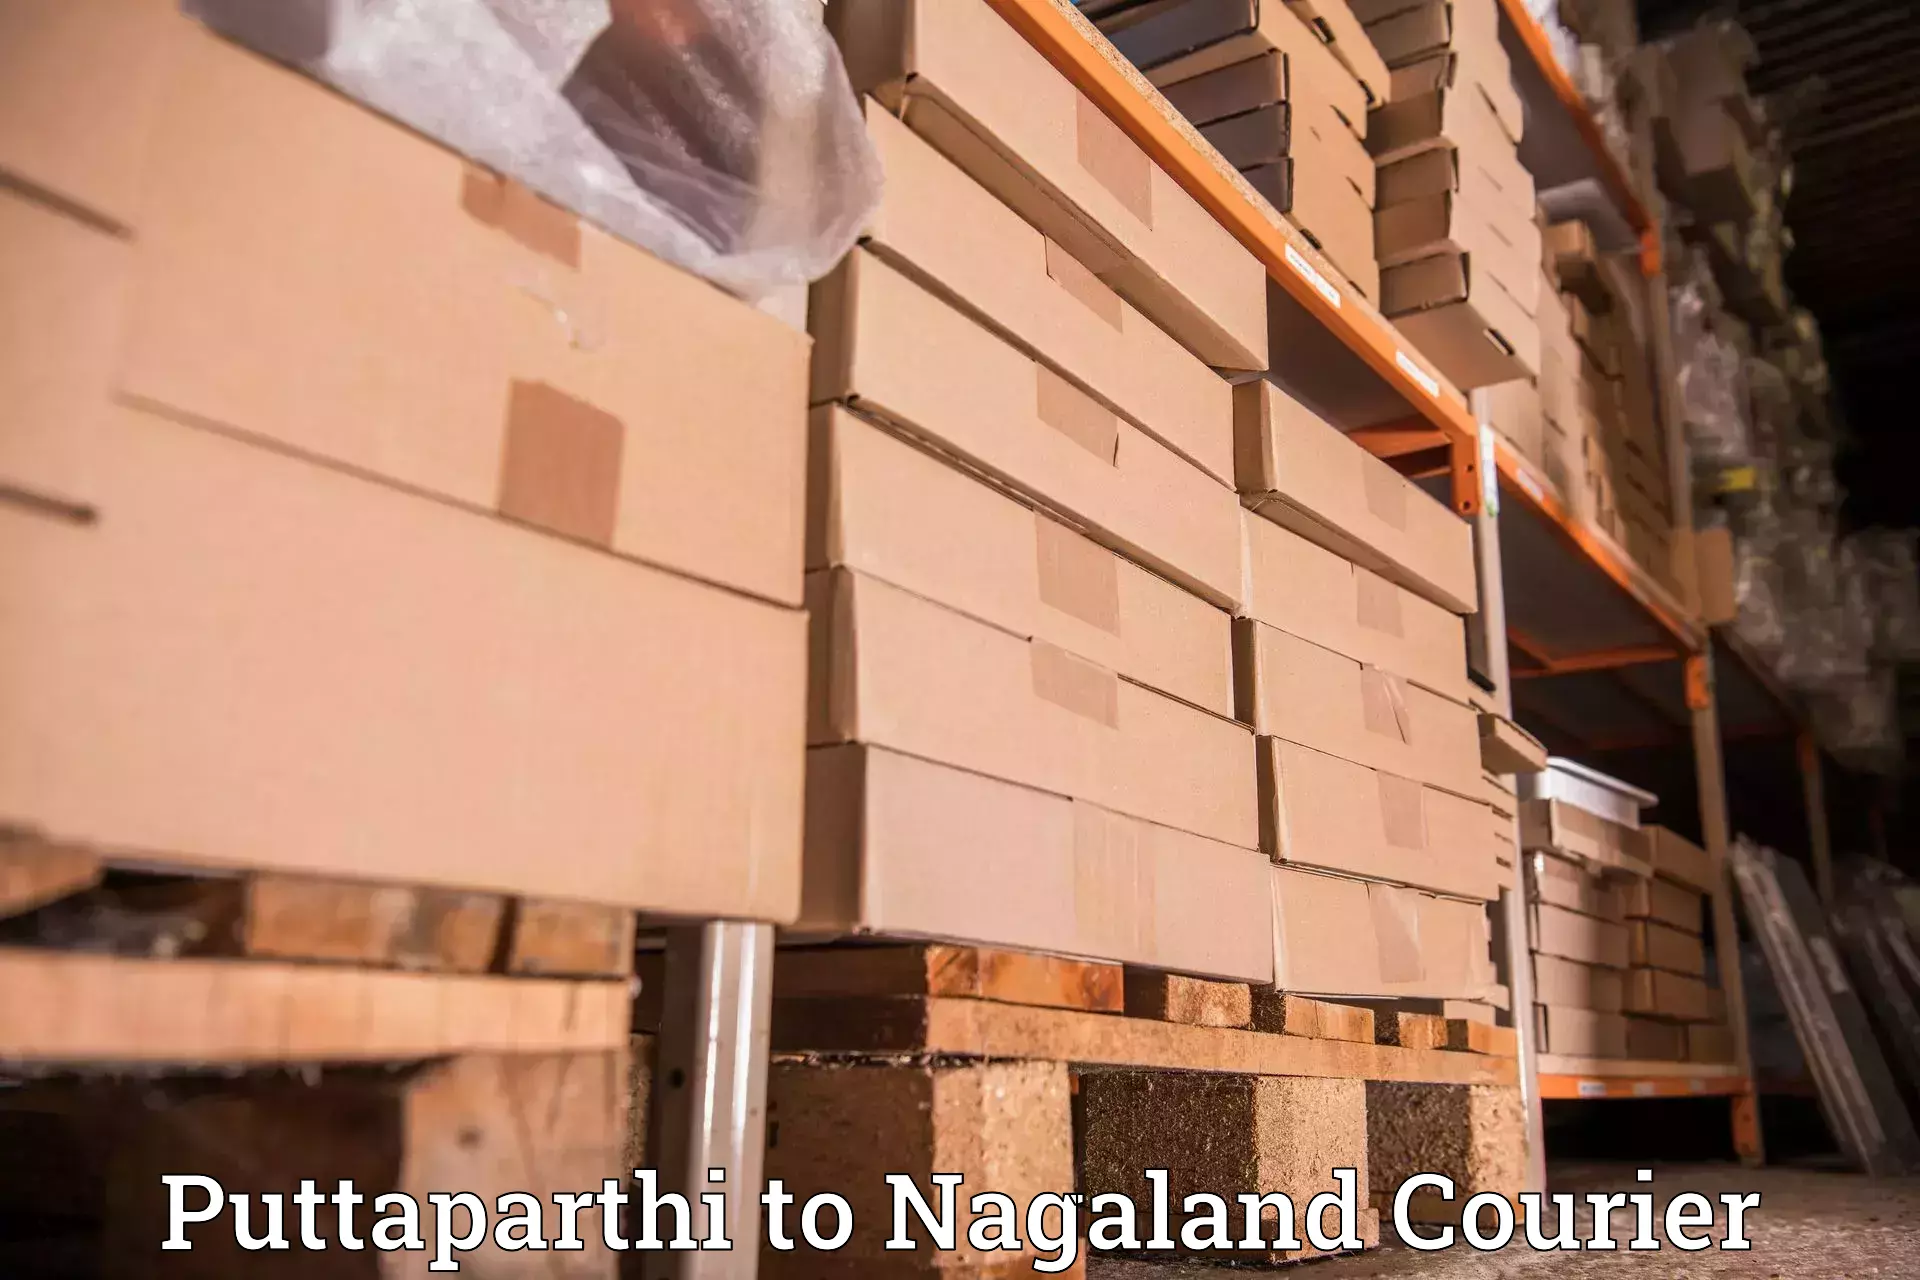 Specialized courier services in Puttaparthi to Dimapur